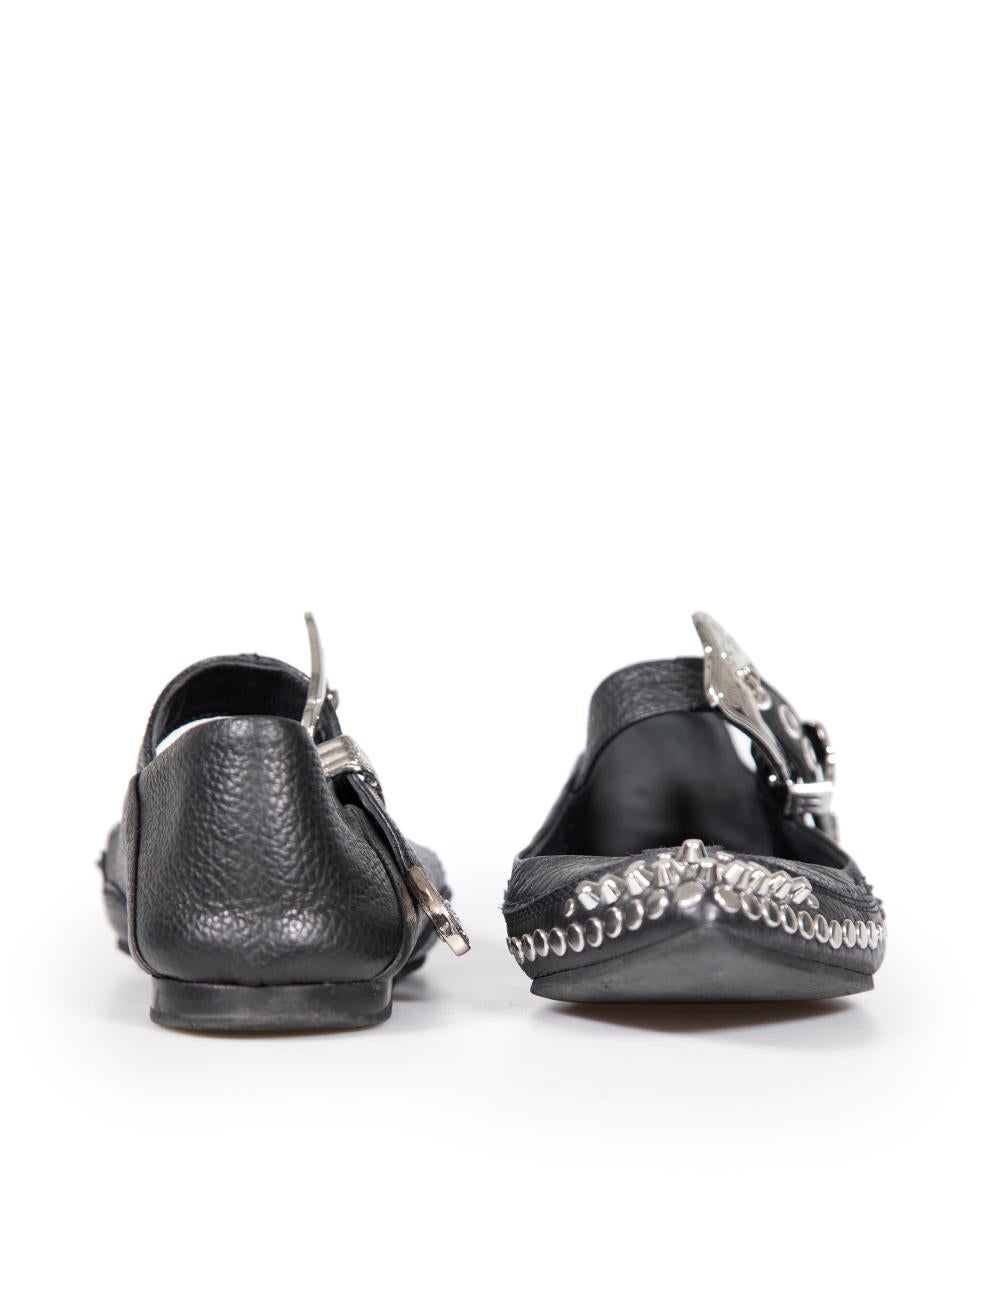 Alexander McQueen McQ Black Leather Studded Flats Size IT 36 In Good Condition For Sale In London, GB